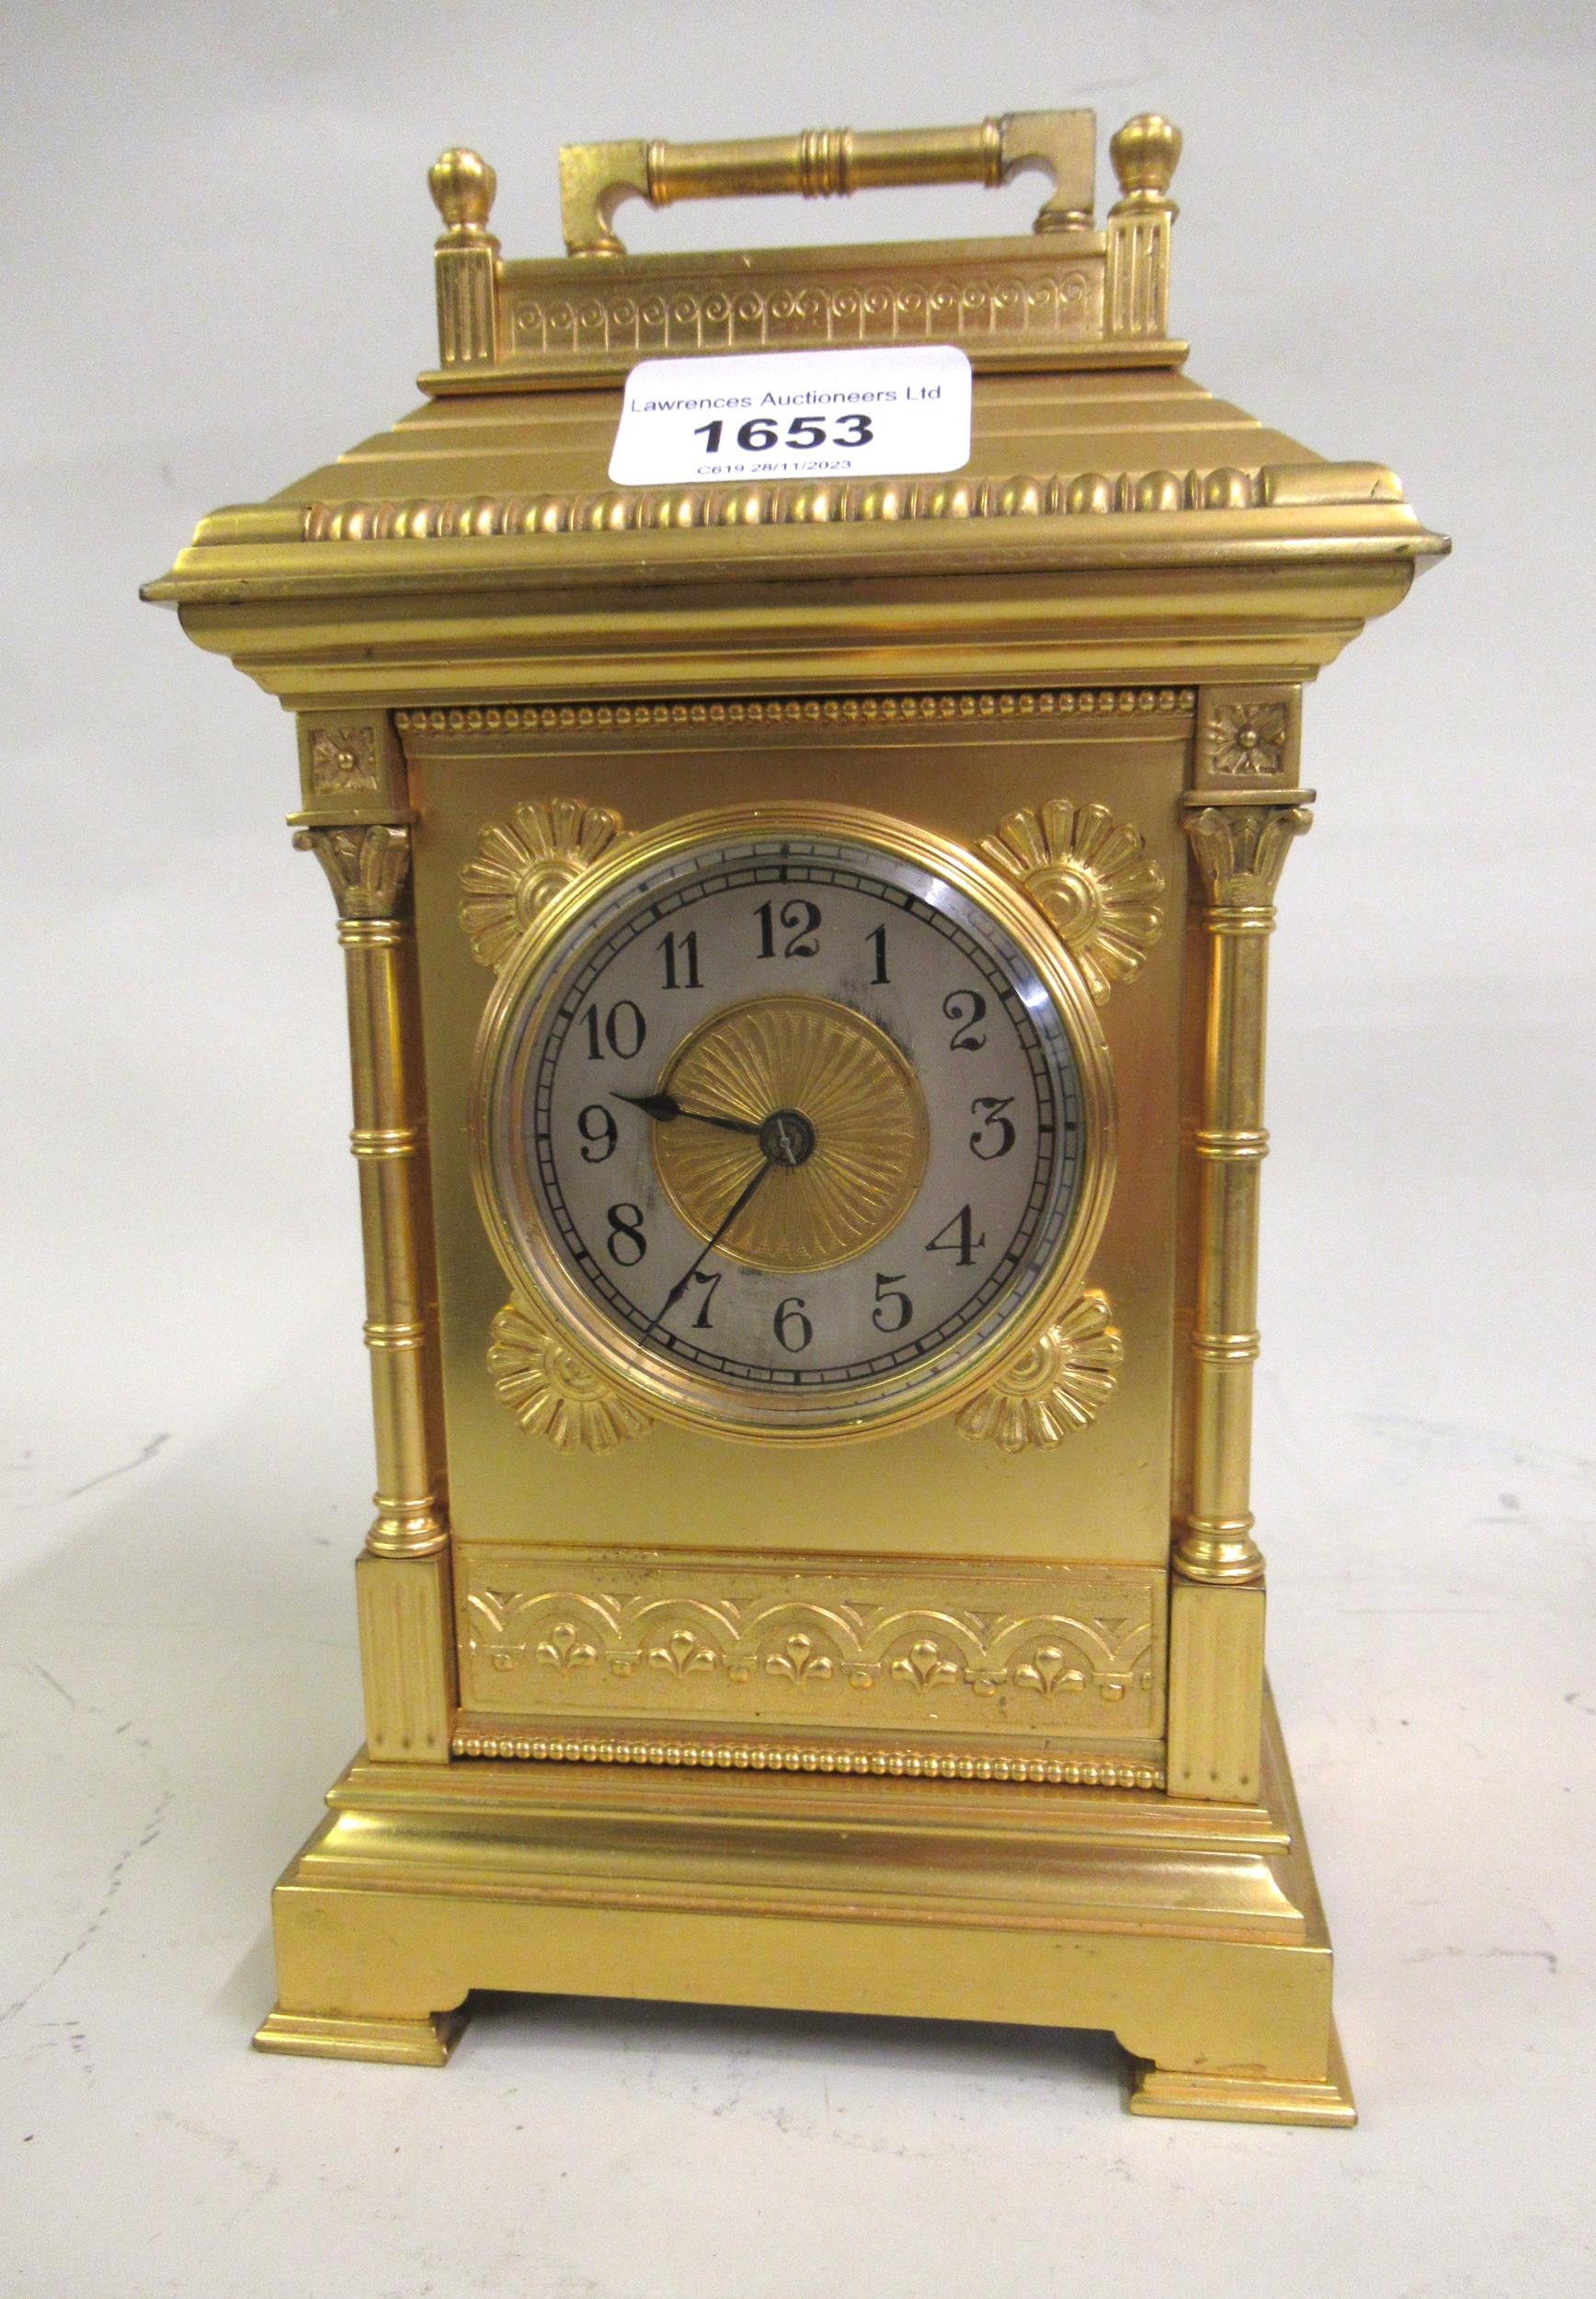 Good quality 19th Century French ormolu carriage clock, the silvered dial with Arabic numerals, with